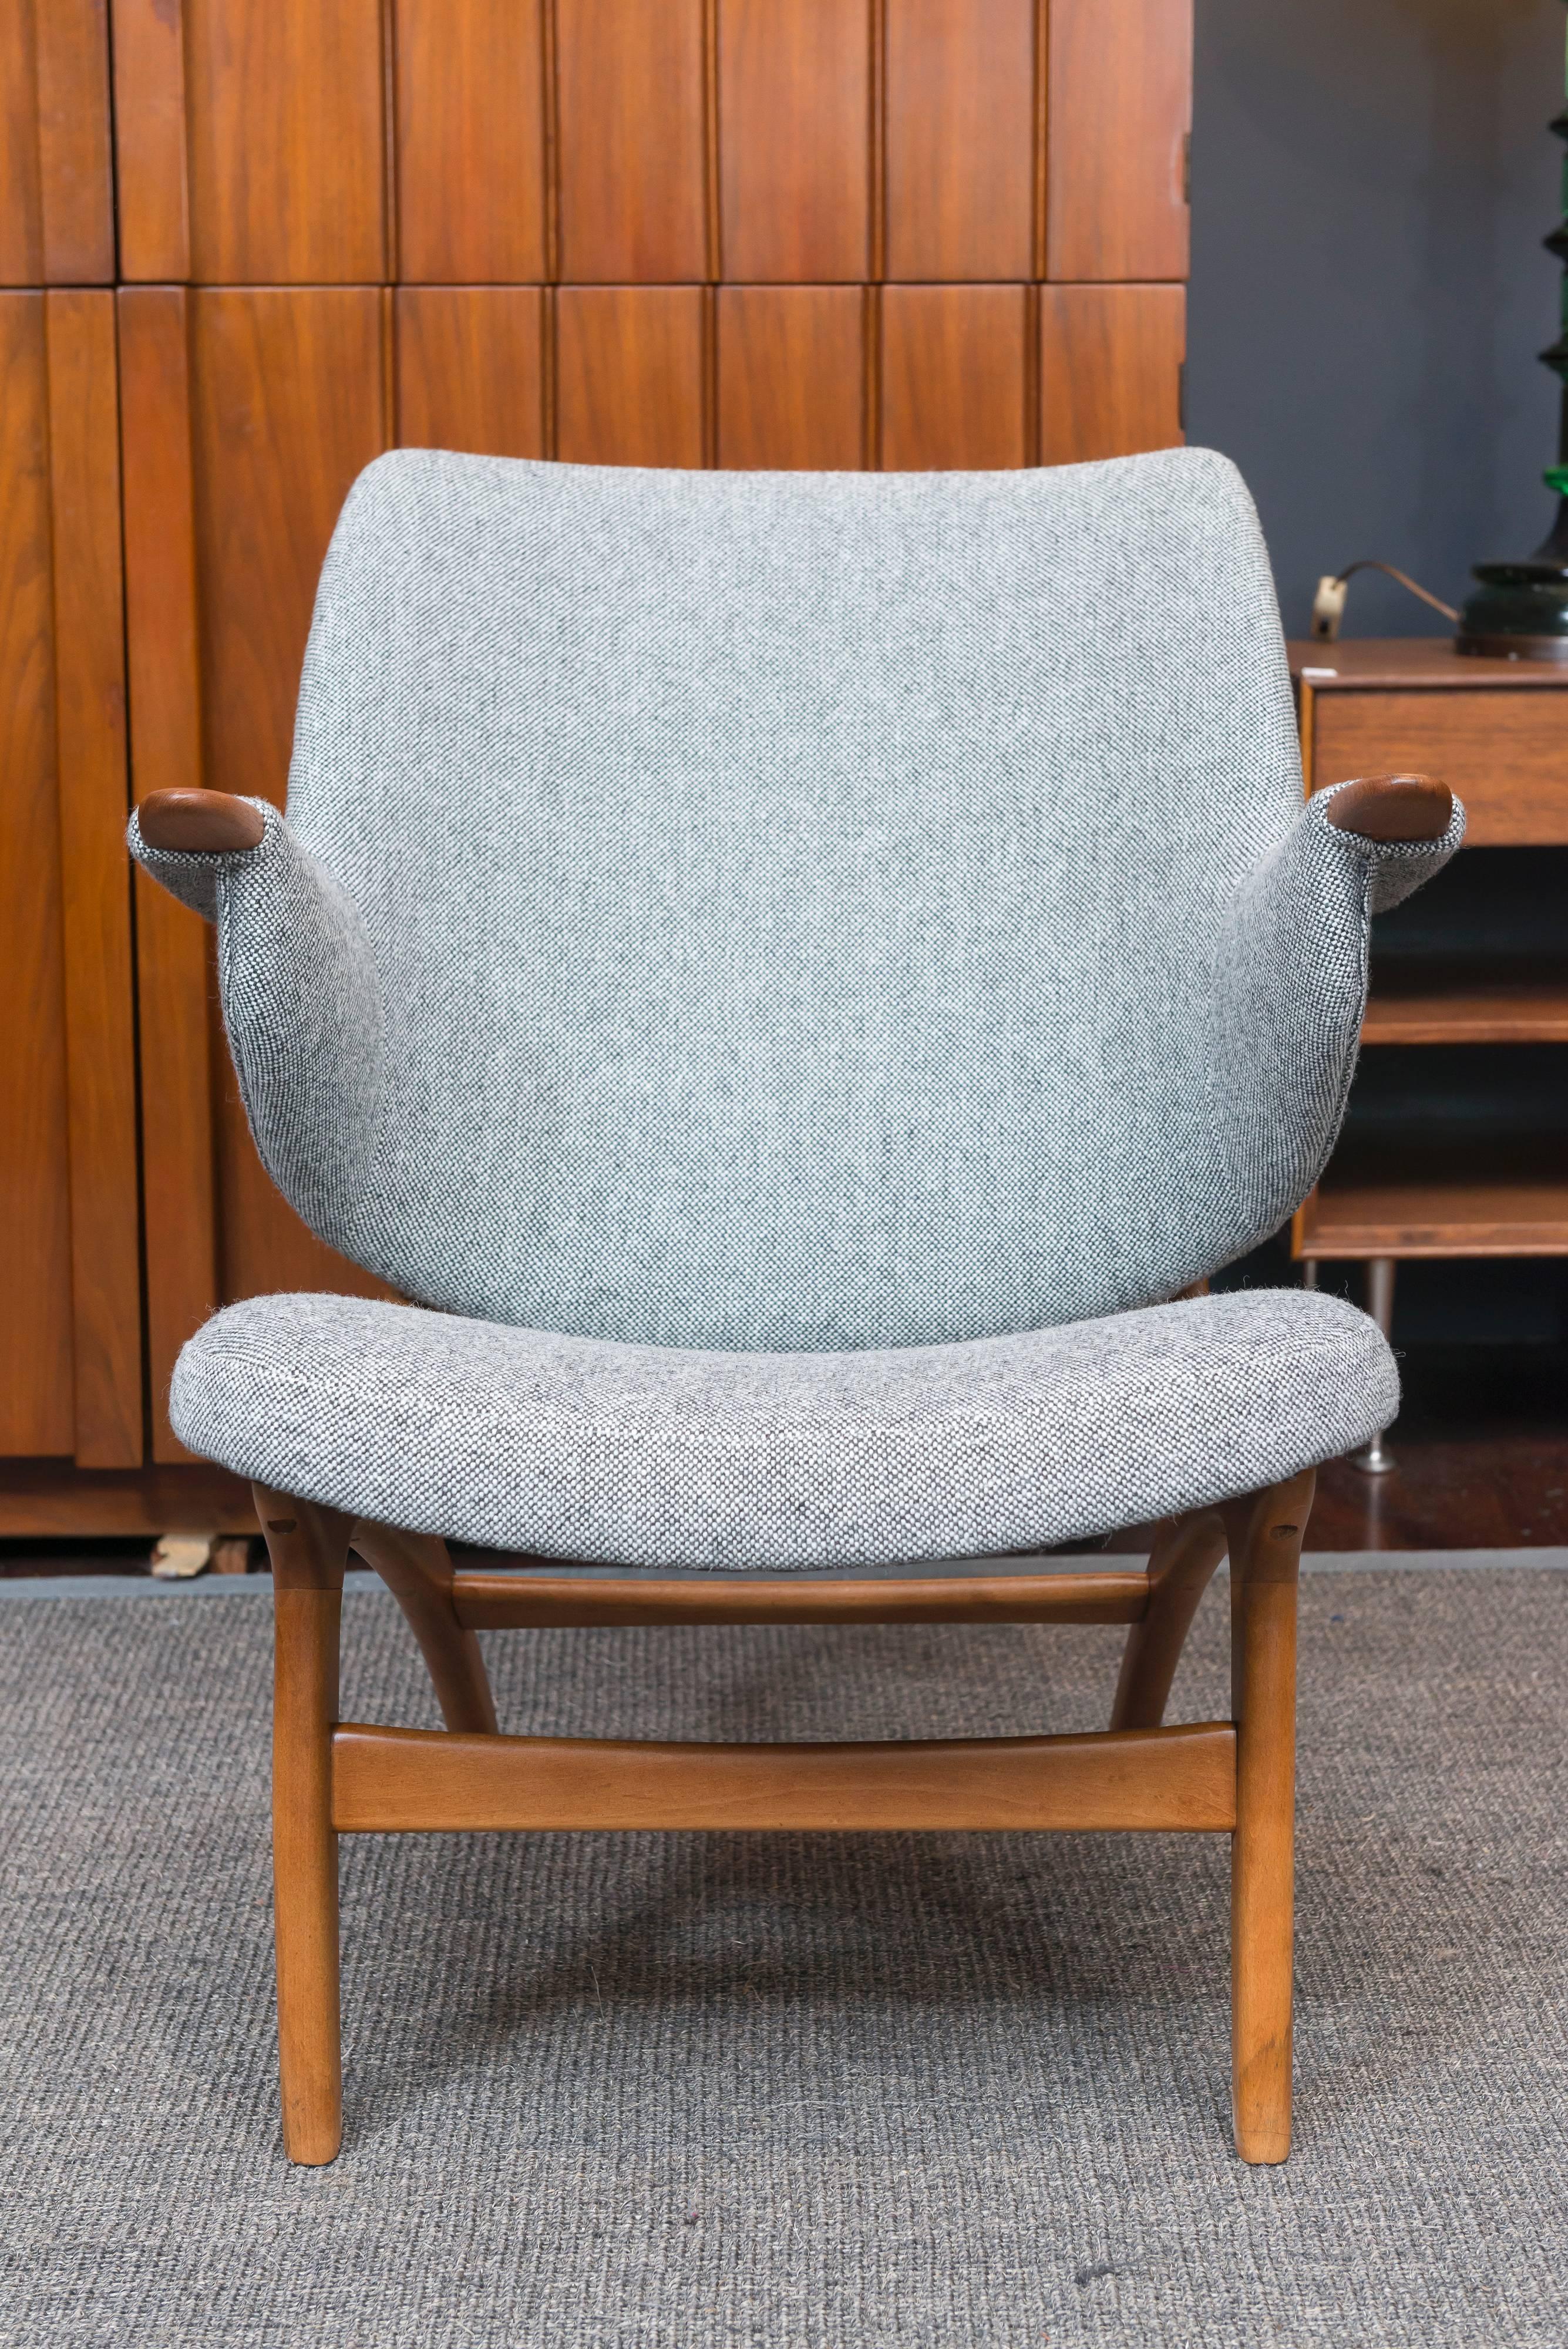 Super comfy Scandinavian Modern teak lounge chair newly refinished and upholstered in Danish wool.